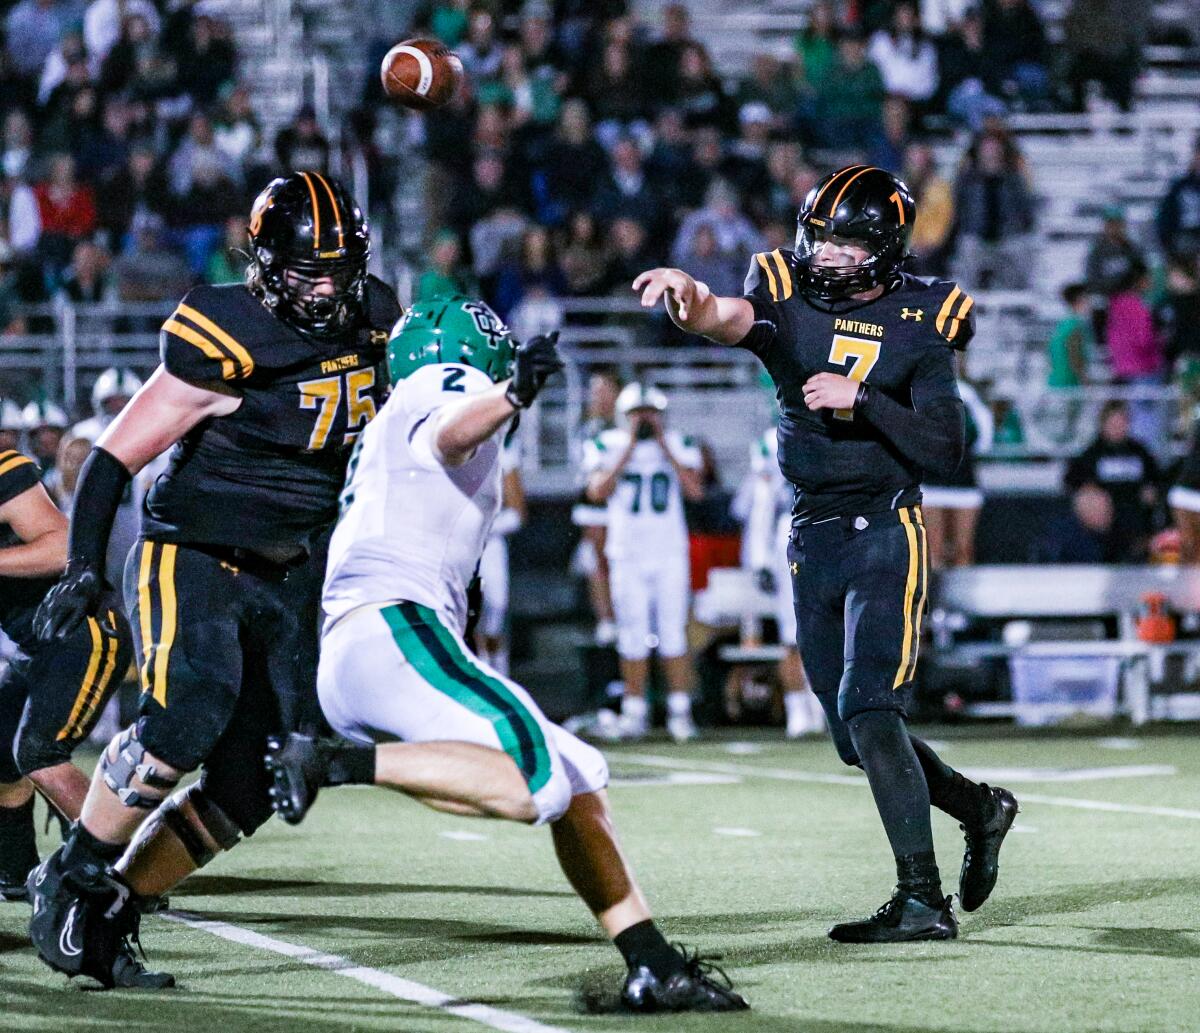 Brady Smigiel of Newbury Park throws a pass under pressure during a win over Thousand Oaks.